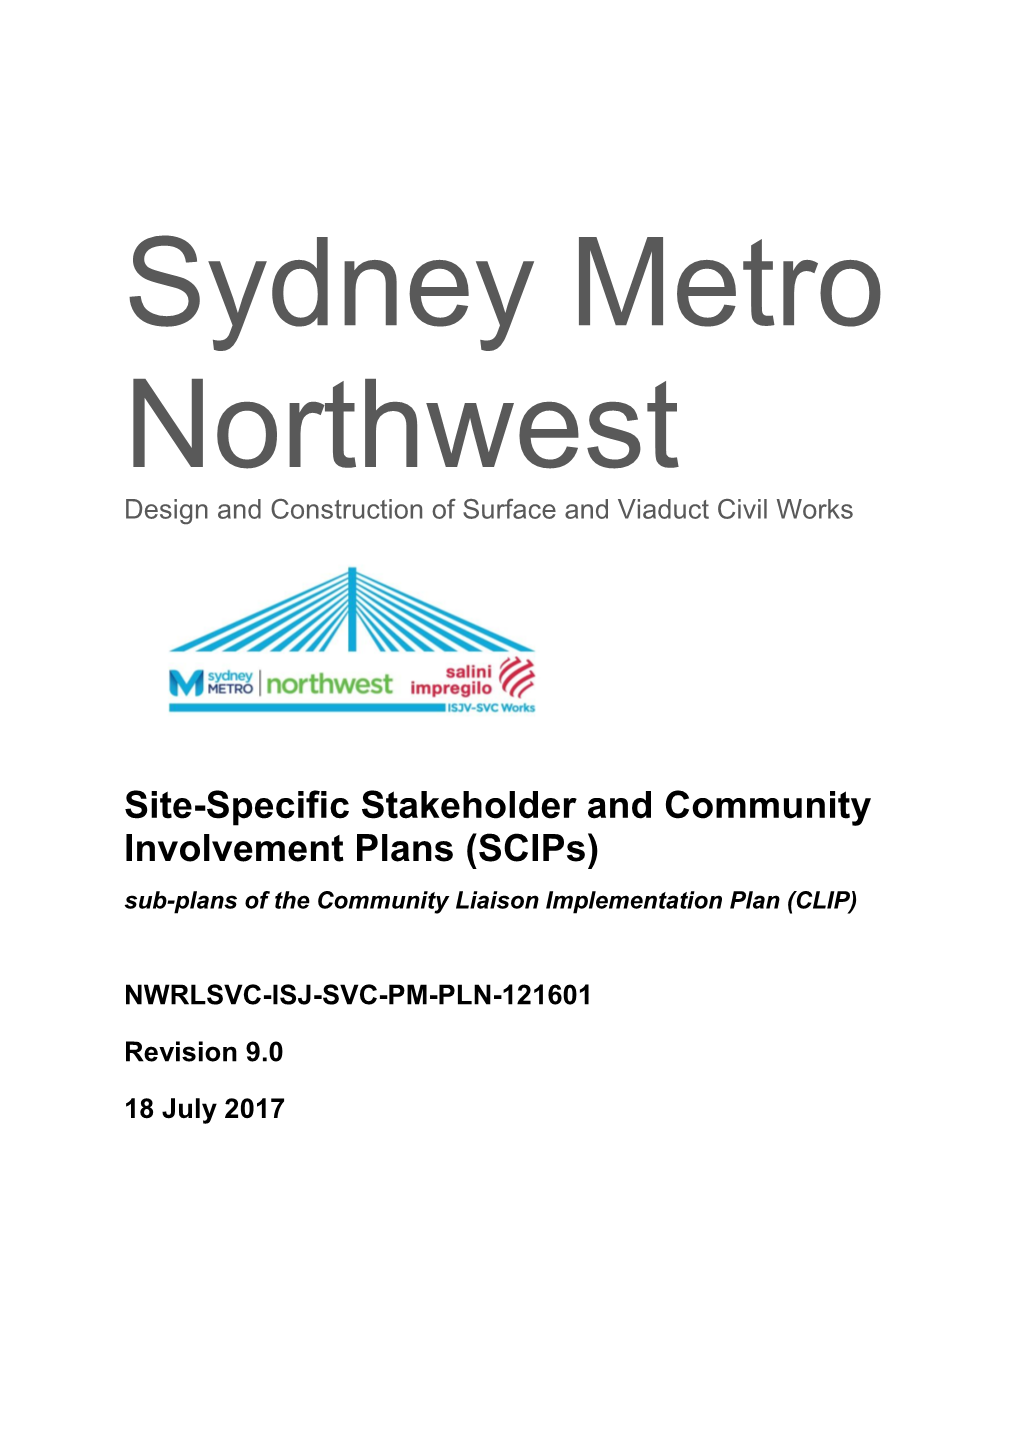 Site-Specific Stakeholder and Community Involvement Plans (Scips) Sub-Plans of the Community Liaison Implementation Plan (CLIP)